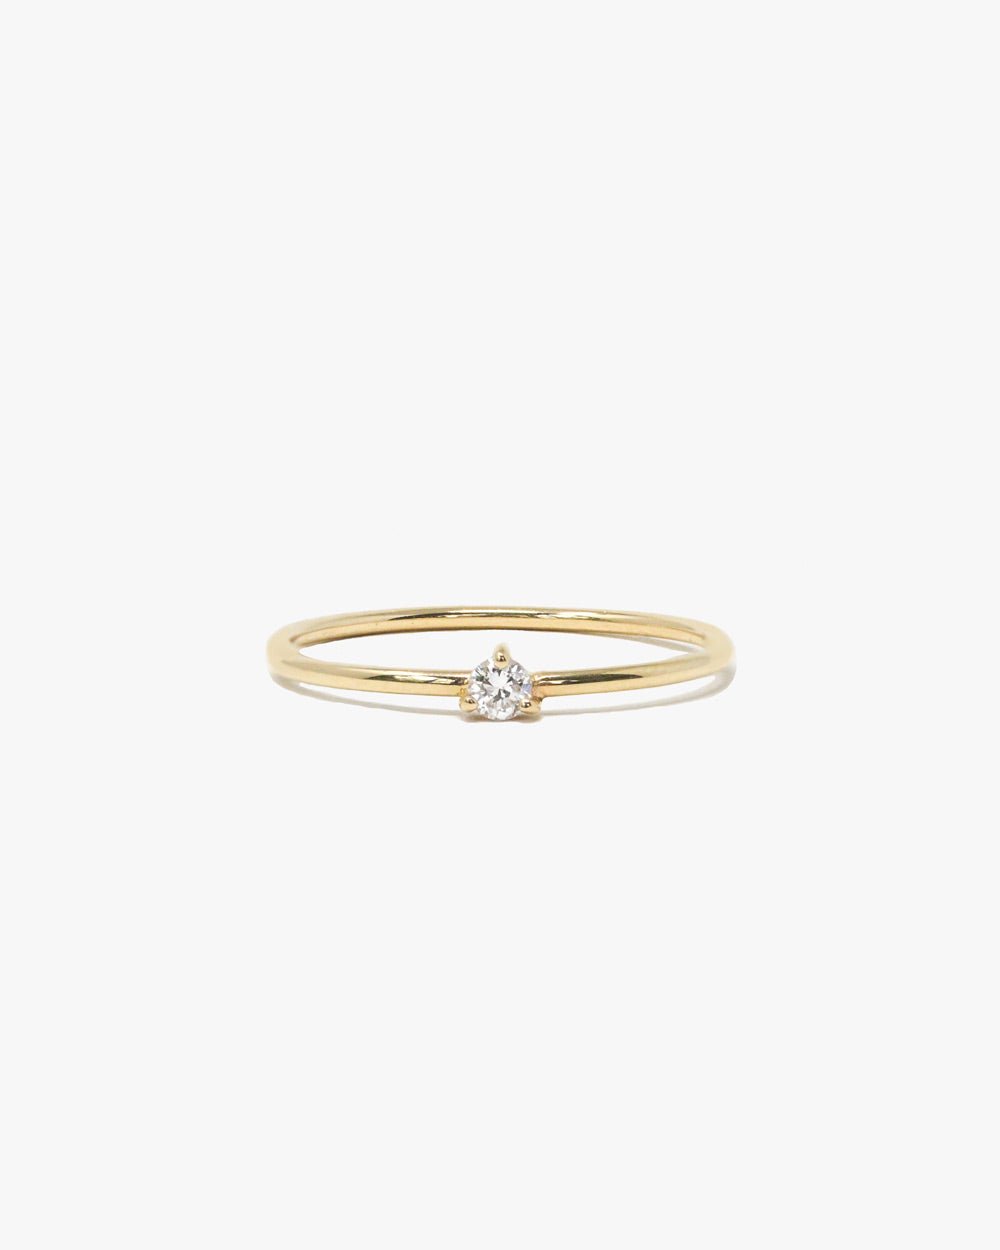 WESTWOOD DIAMOND STACKER RING - Shop Cupcakes and Cashmere